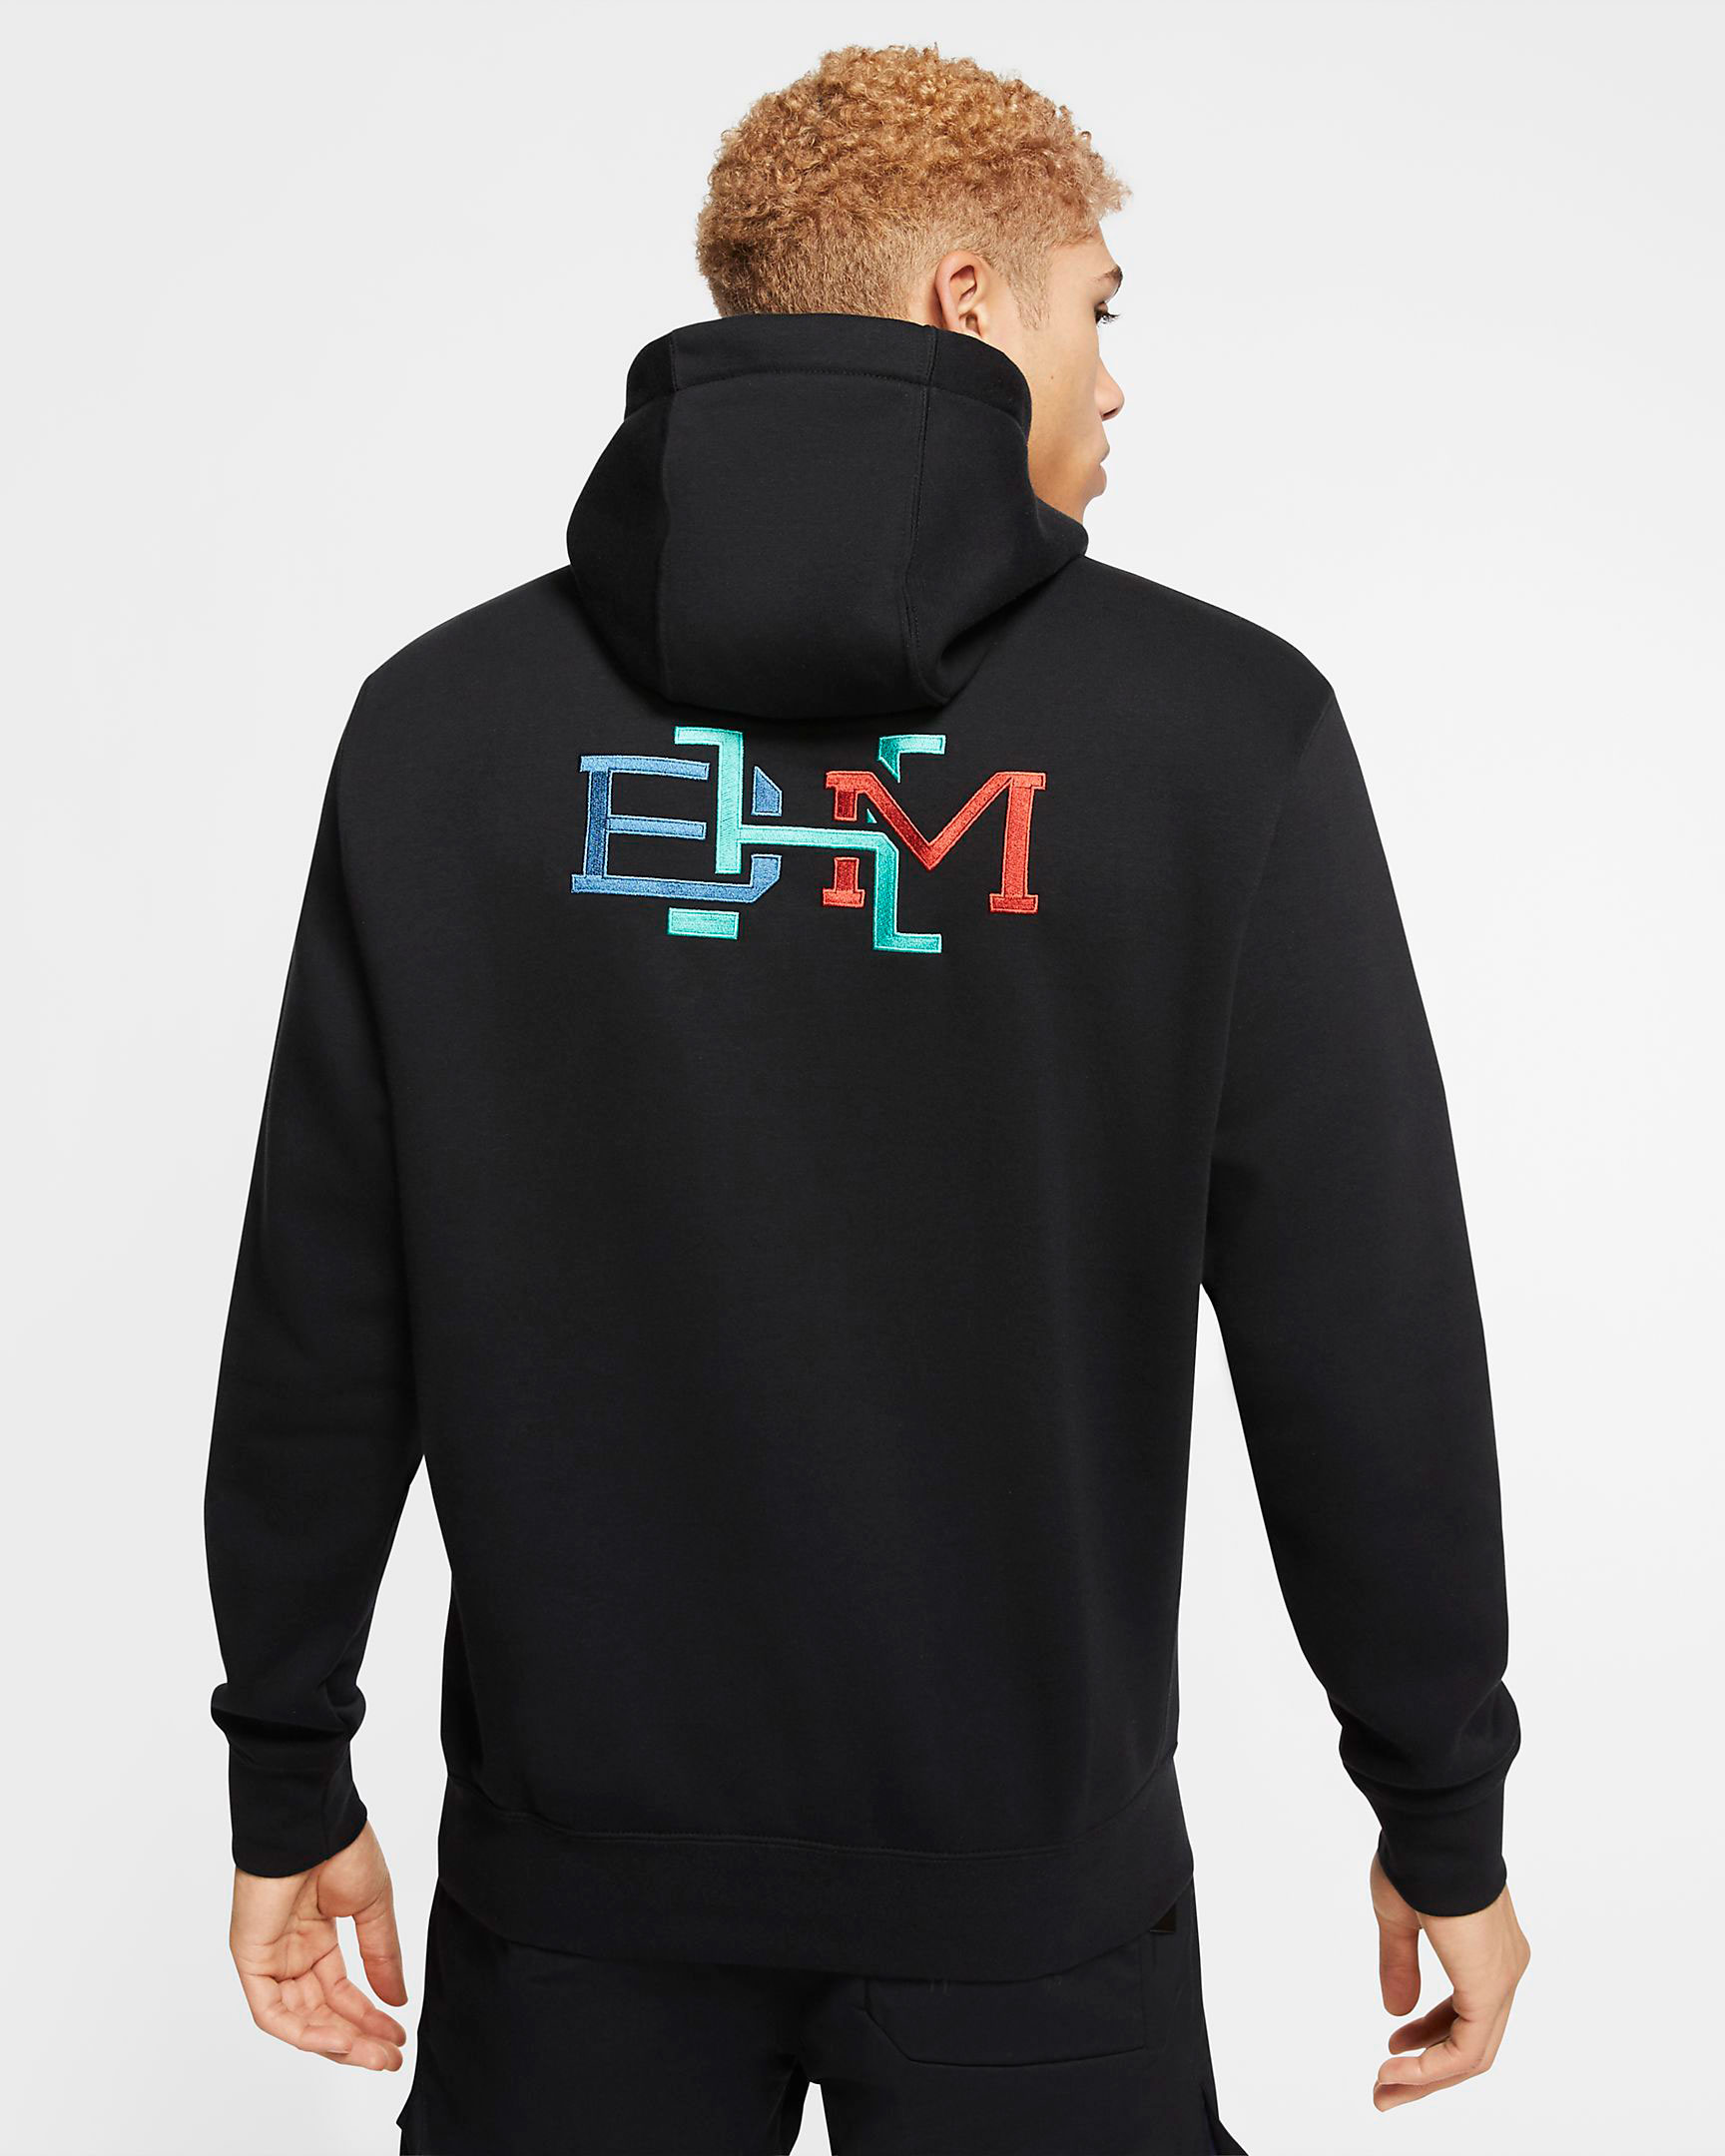 Nike BHM 2020 Sneakers and Clothing 